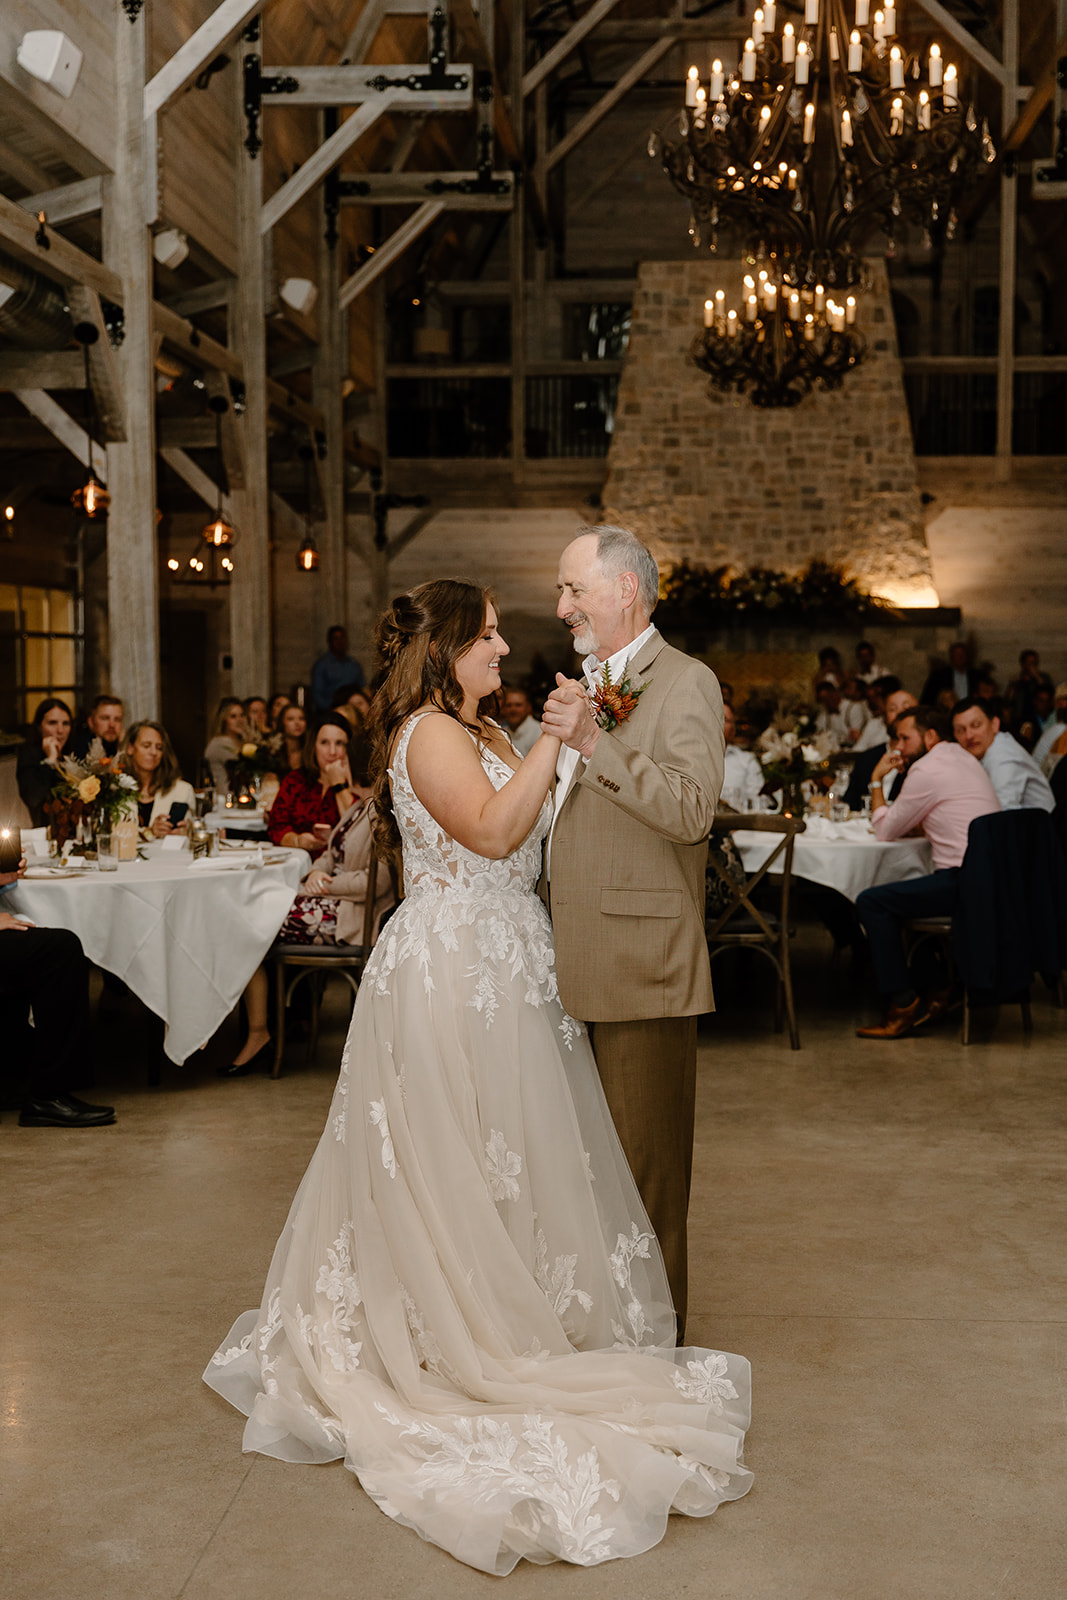 Bride and father dance in front of their guests